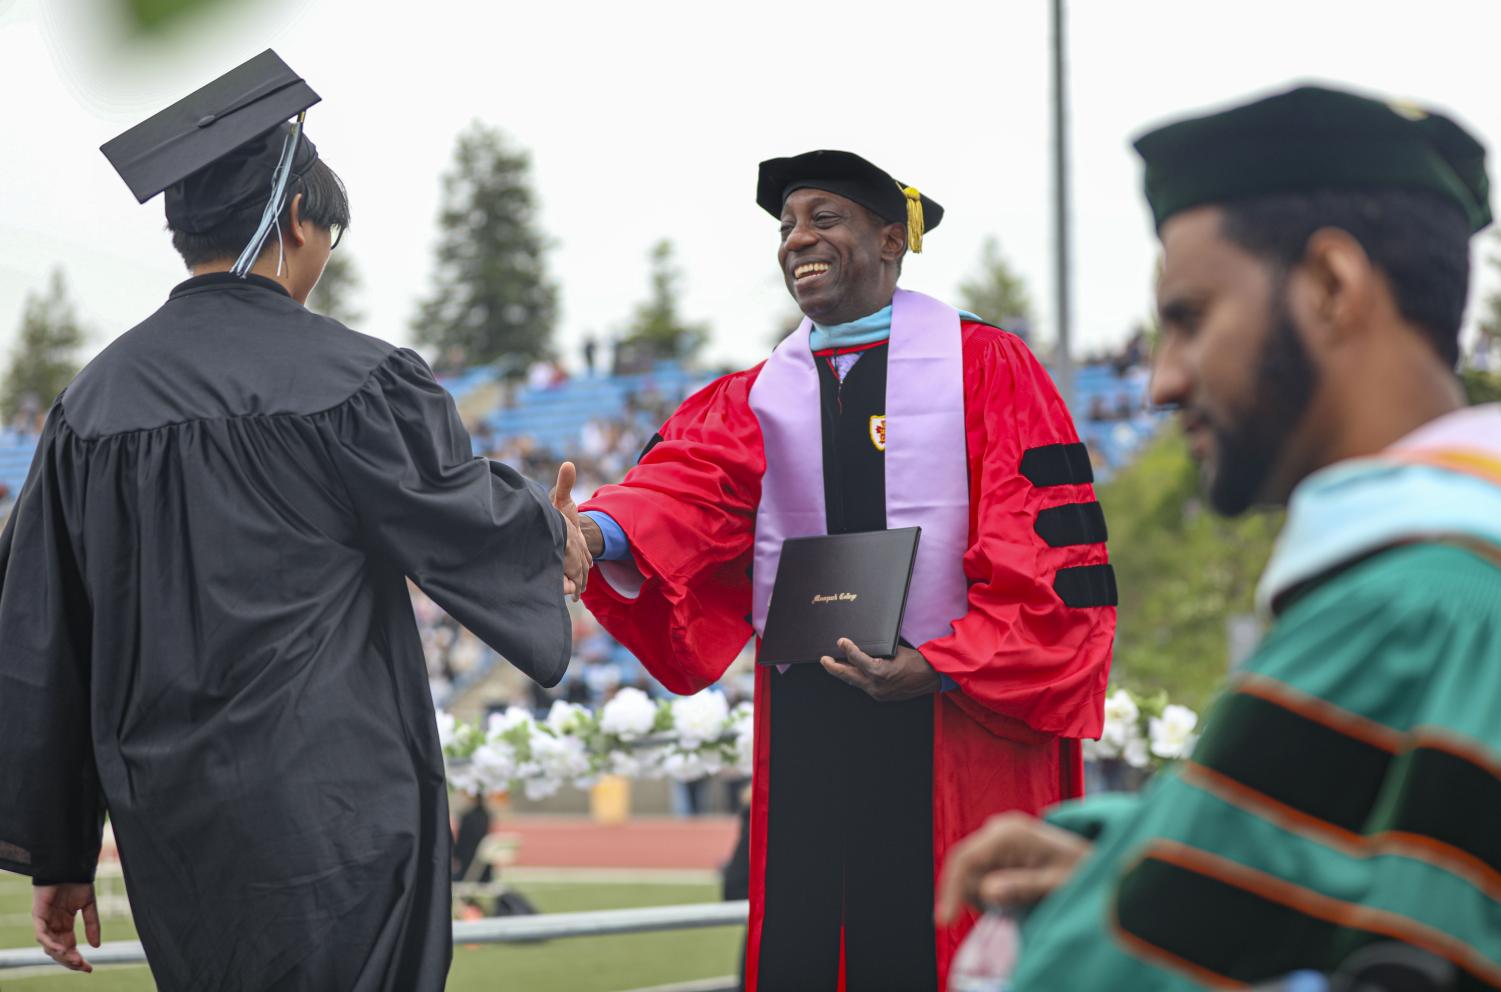 Moorpark College President Julius Sokenu shakes hands with a graduating student while presenting diplomas to the class of 2023 on Friday, May 19 in Moorpark, CA.